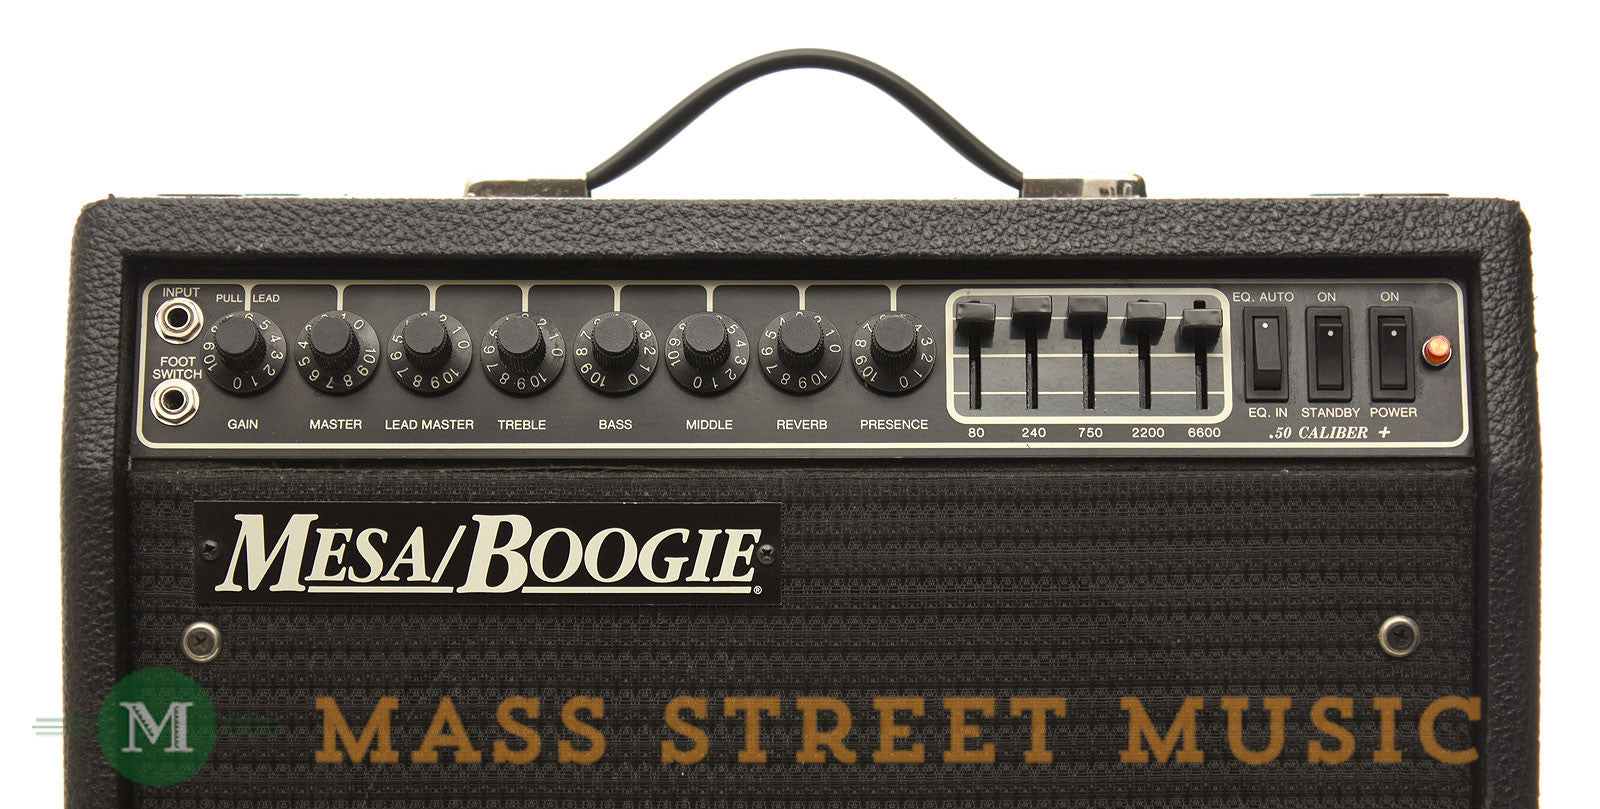 Mesa Boogie Amps - USED 50 Caliber+